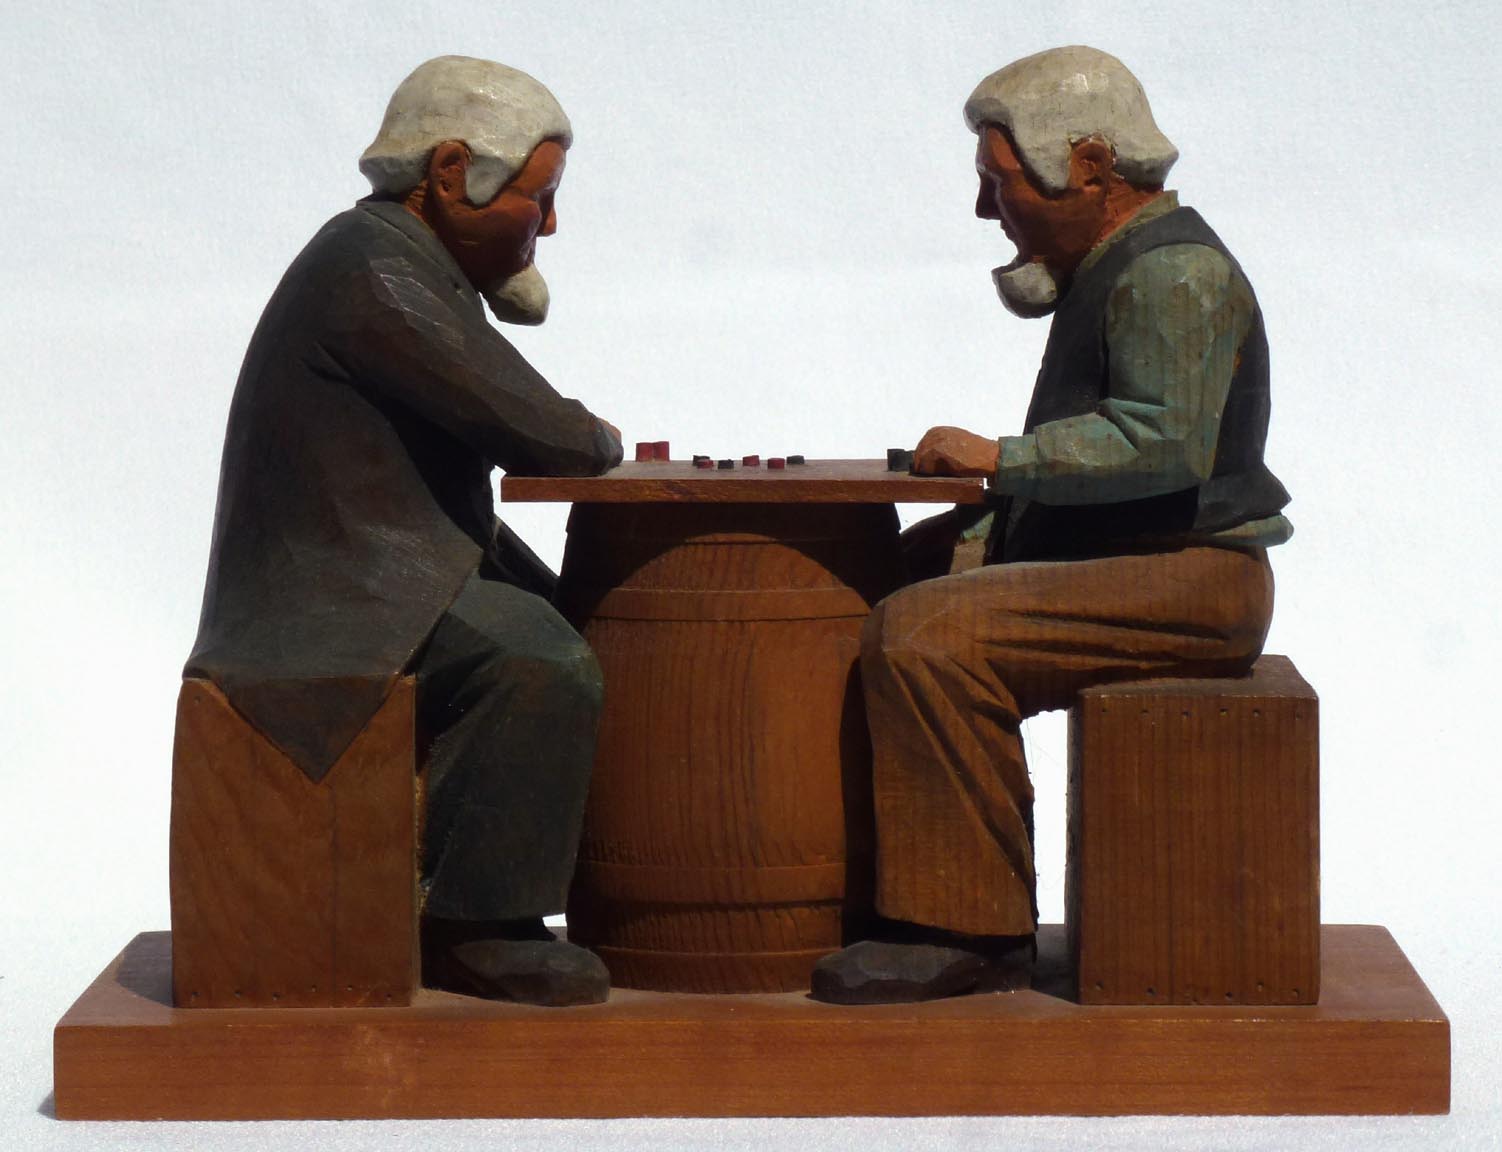 Carving of men playing checkers